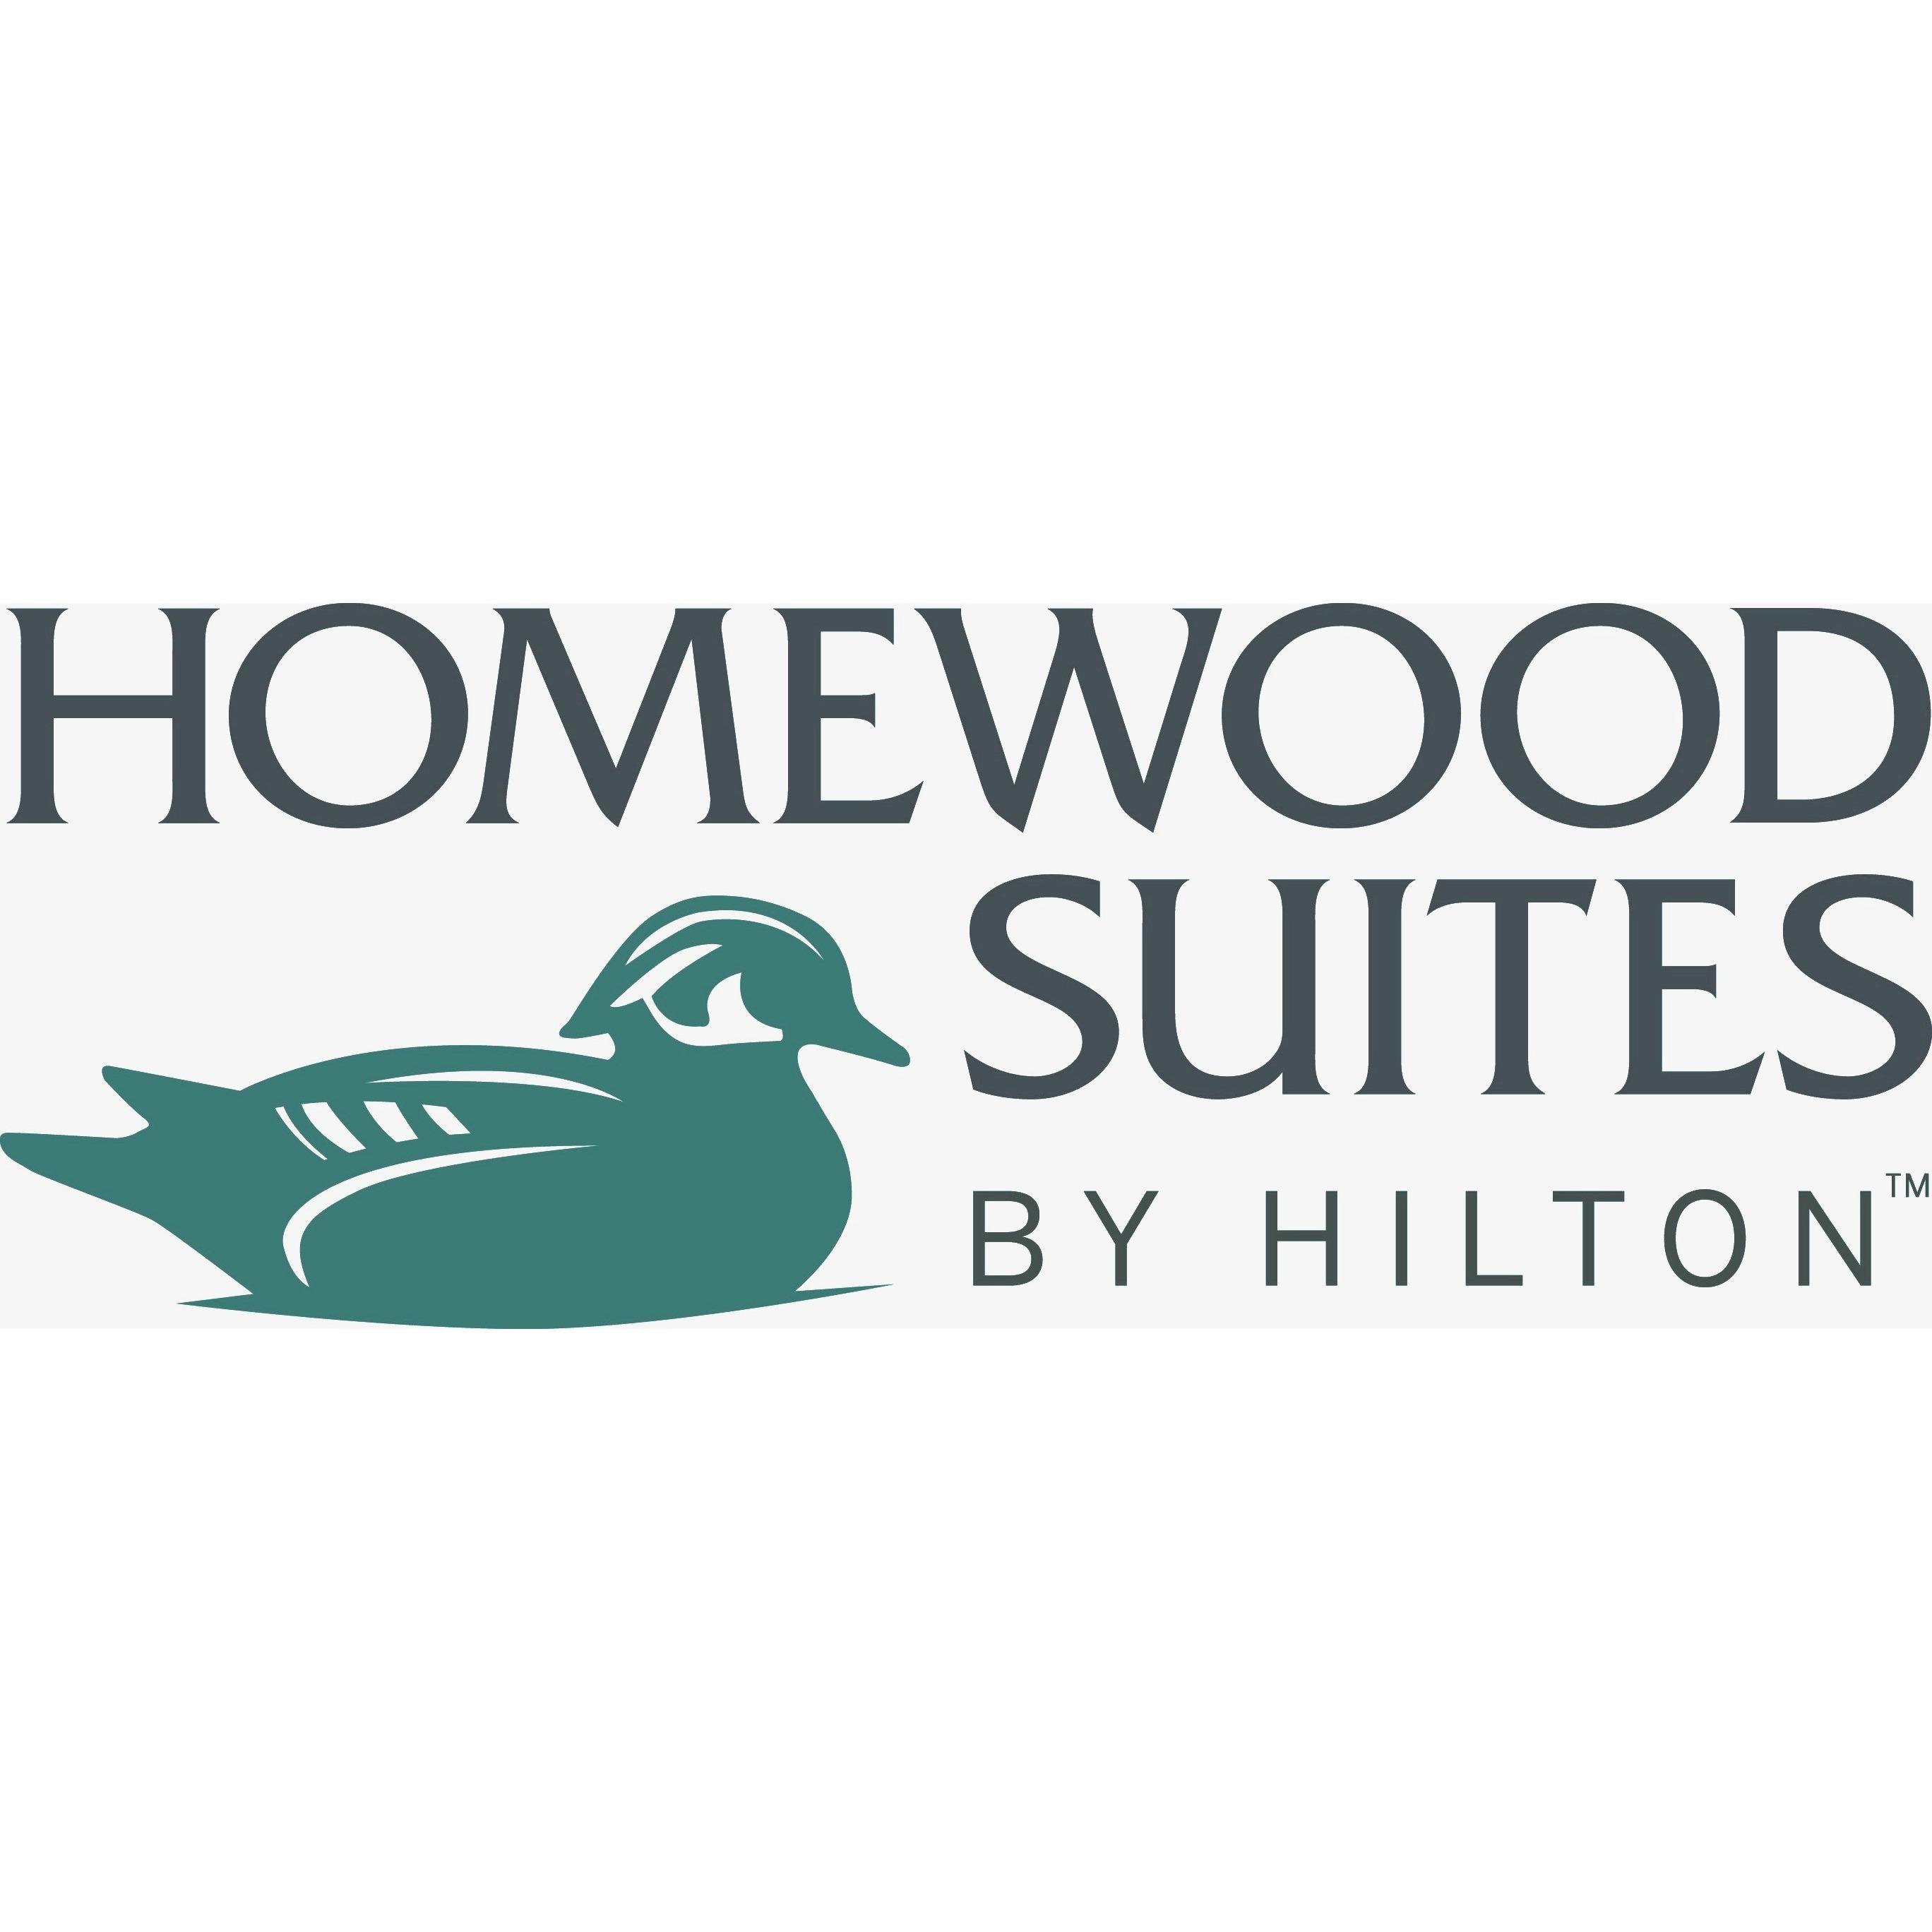 Homewood Suites by Hilton Metairie New Orleans - Metairie, LA 70002 - (504)509-7410 | ShowMeLocal.com